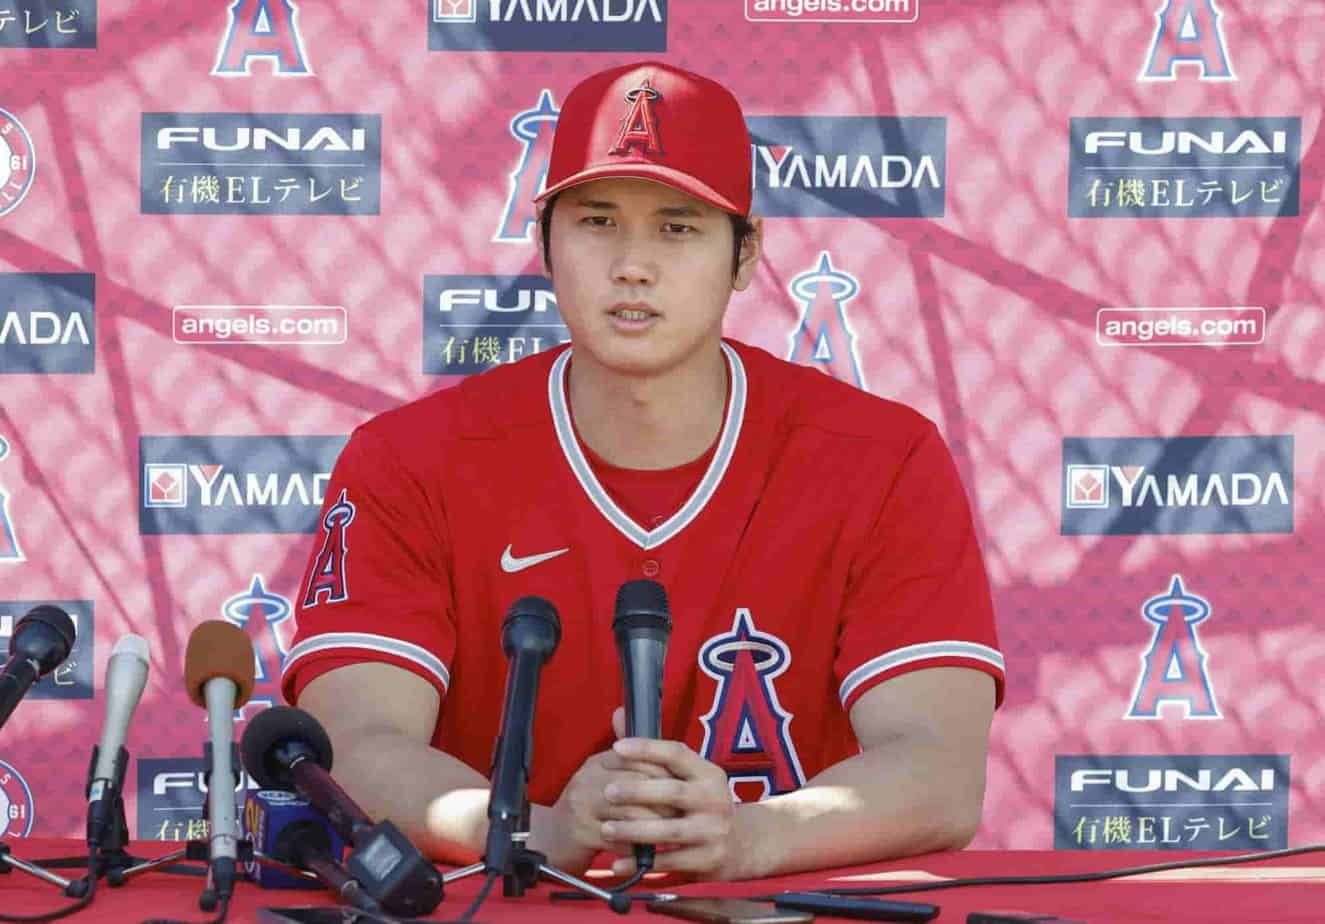 Image of Shohei Ohtani a designated Hitter for the Los Angeles Angels 